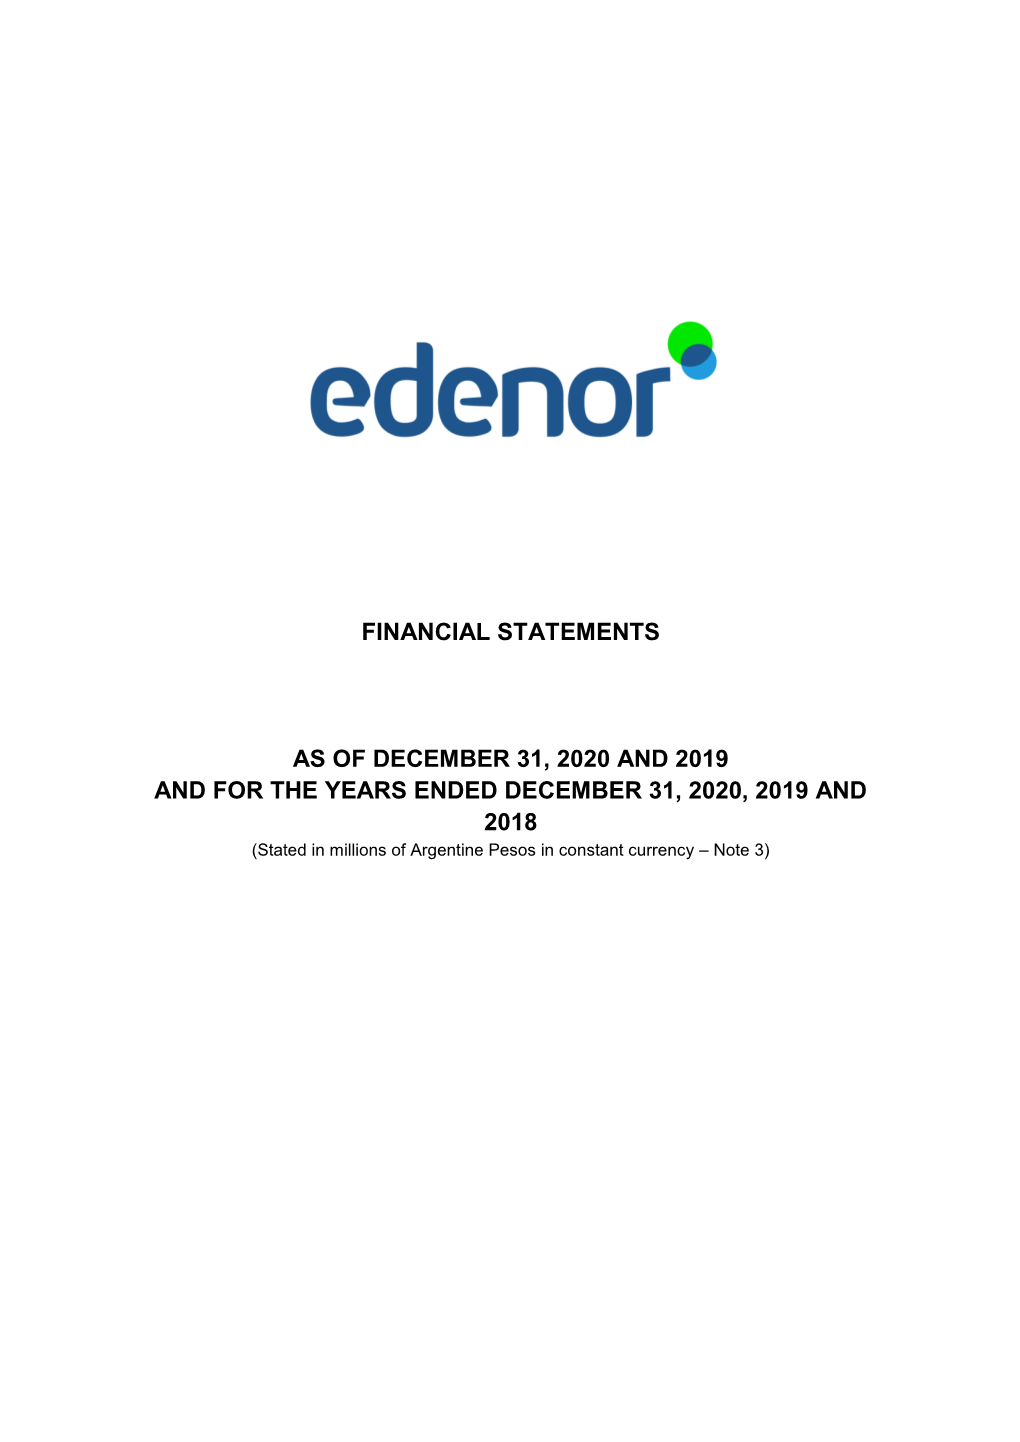 Financial Statements As of December 31, 2020 and 2019 and for the Years Ended December 31, 2020, 2019 and 2018